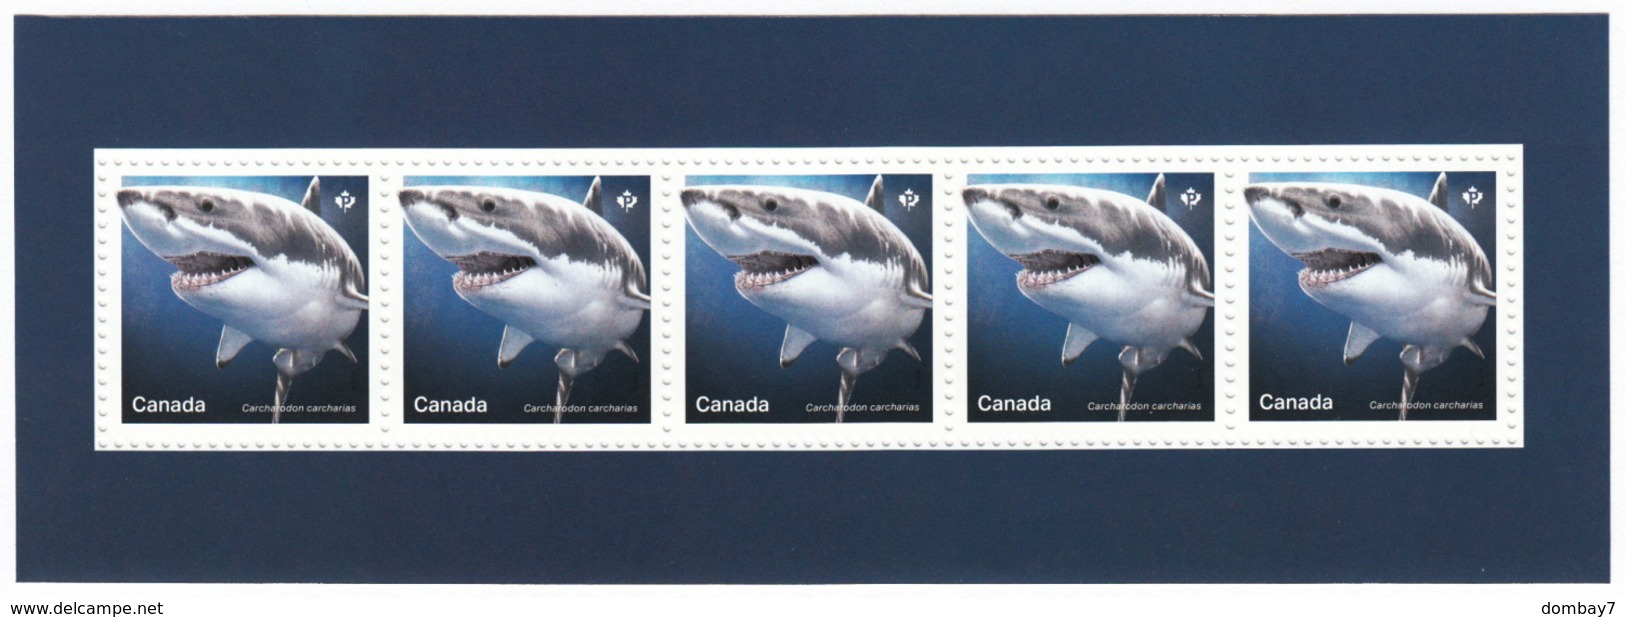 = SHARKS In Canadian Waters = HAIFISCH = REQUIN = Tiburón = SQUALO = 5 Souvenir Sheets From Uncut Sheet Canada 2018 - Marine Life